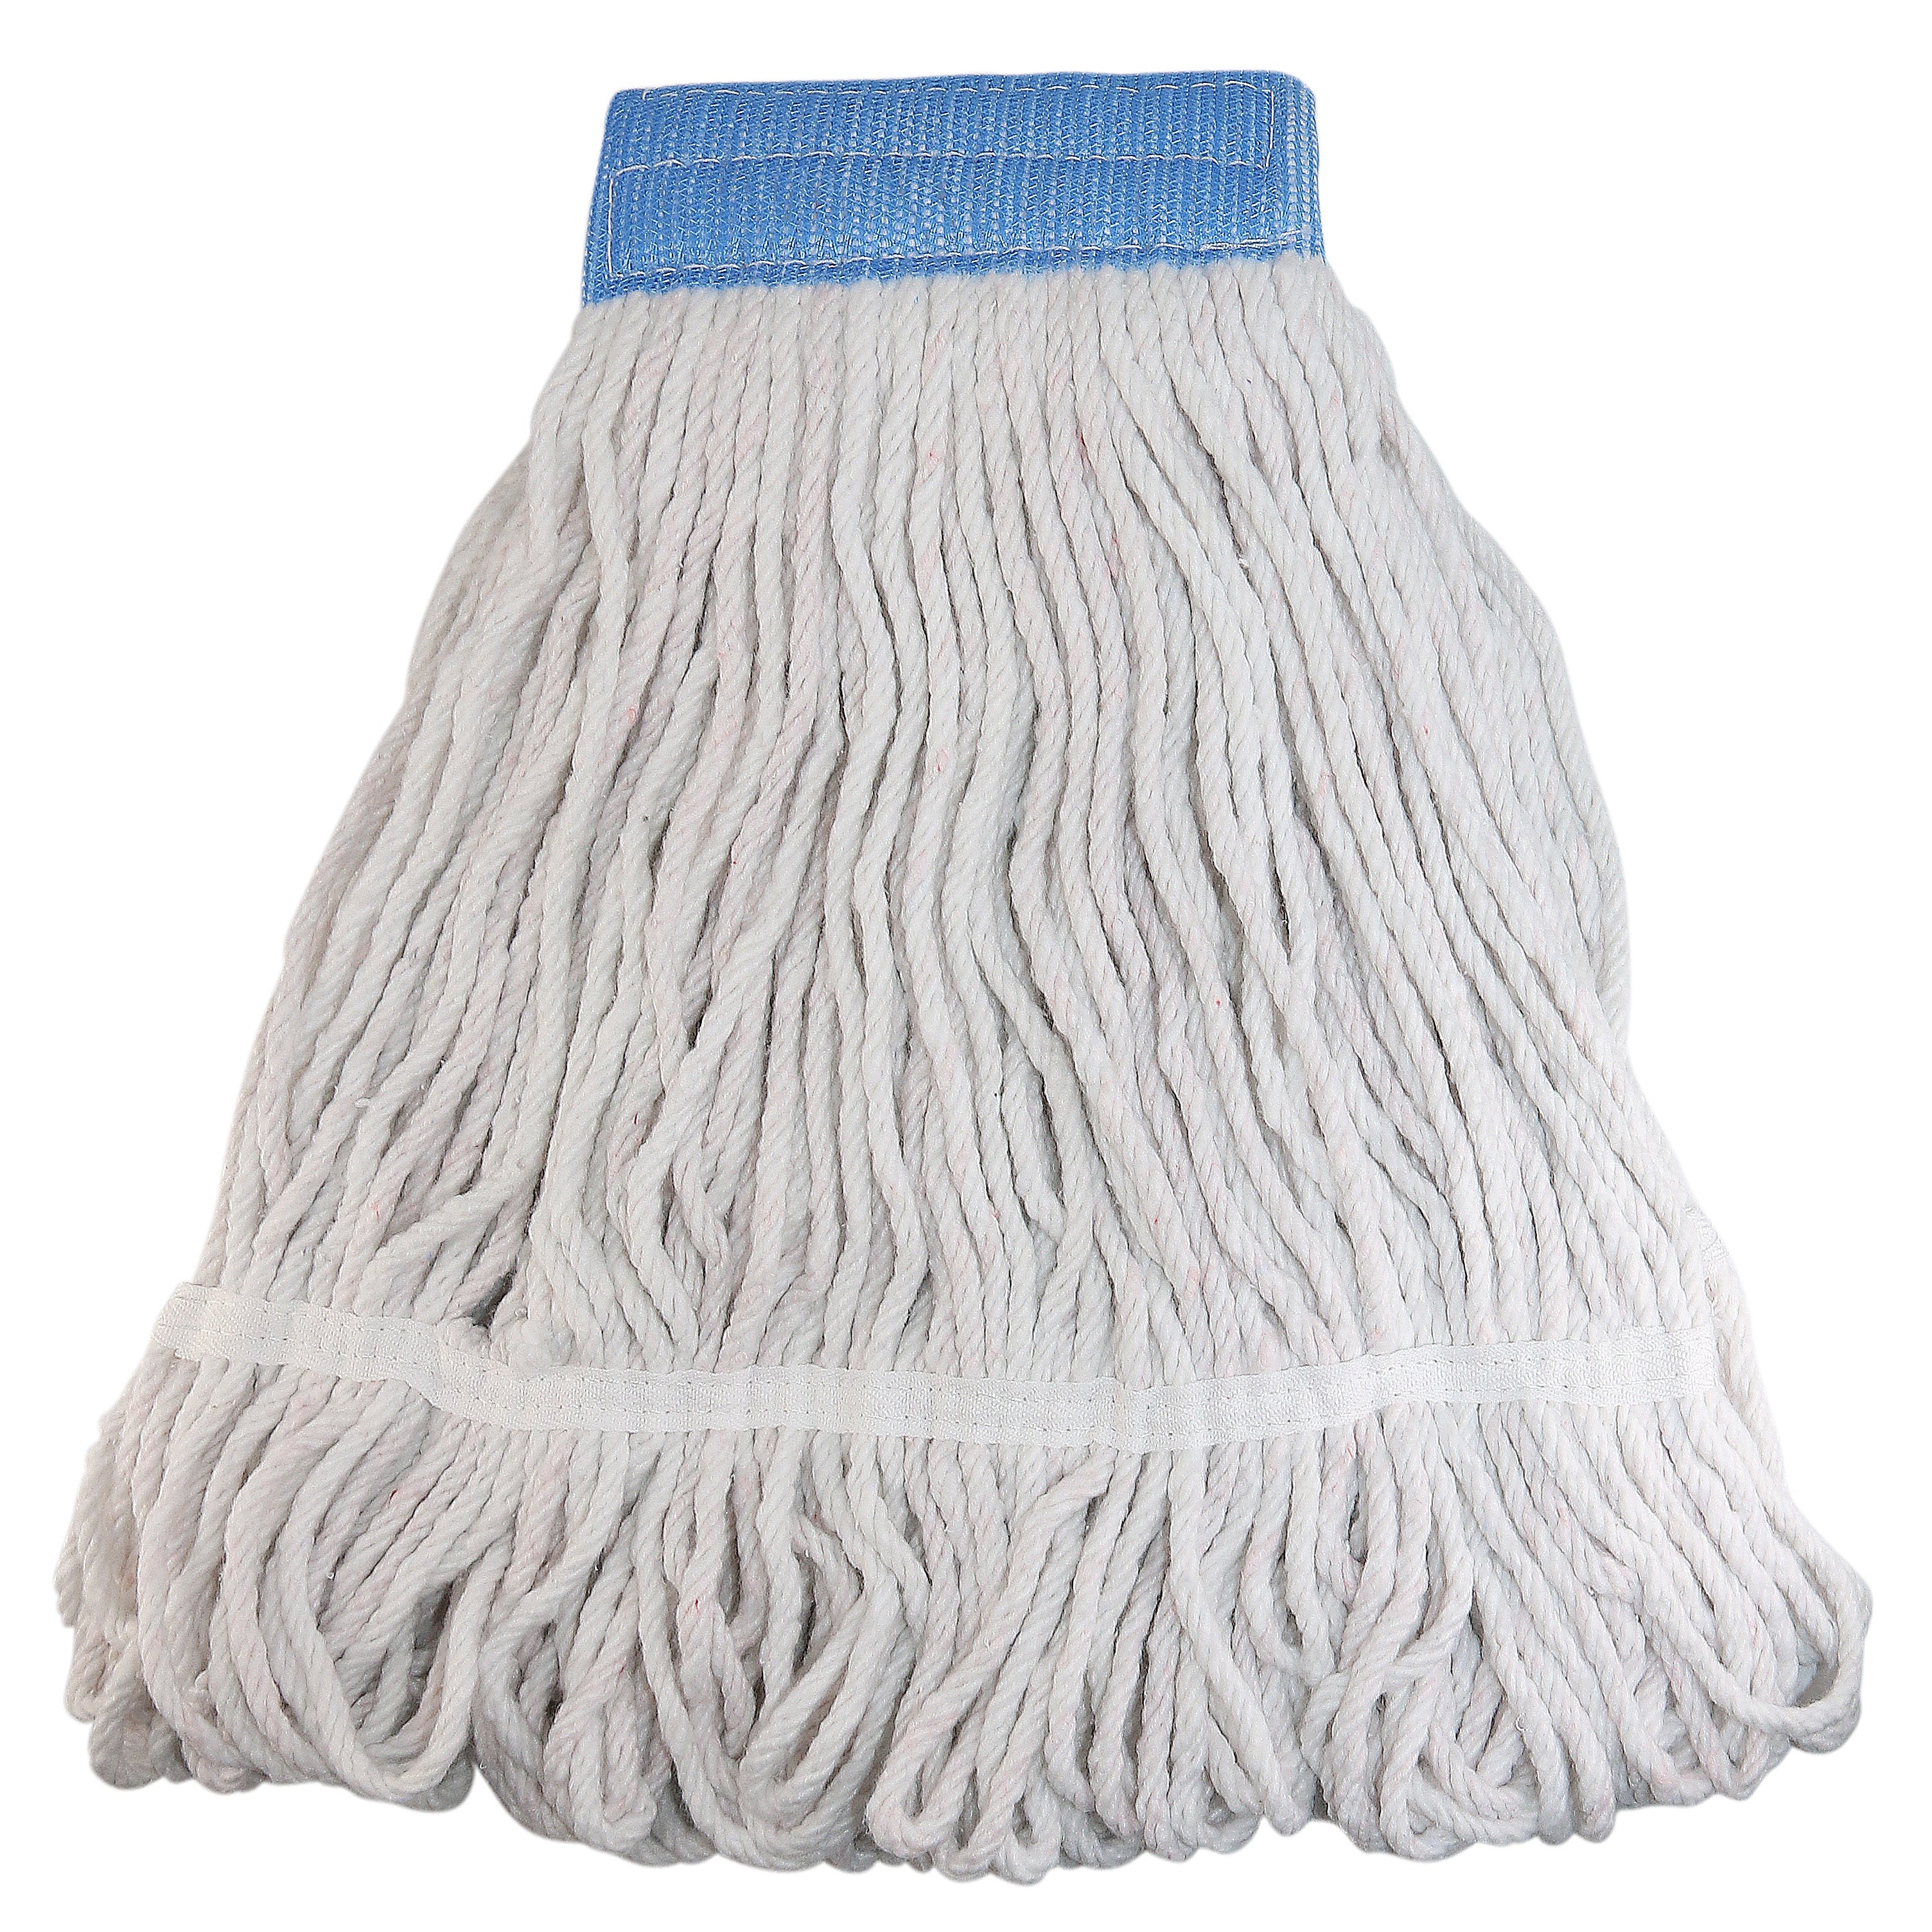 Bonison Commercial Use Wringer Style Replacement Mop Head For Clamp Mop With Looped Ends And Yarn Tailband, Heavy Duty And Long Lasting. (1, White)